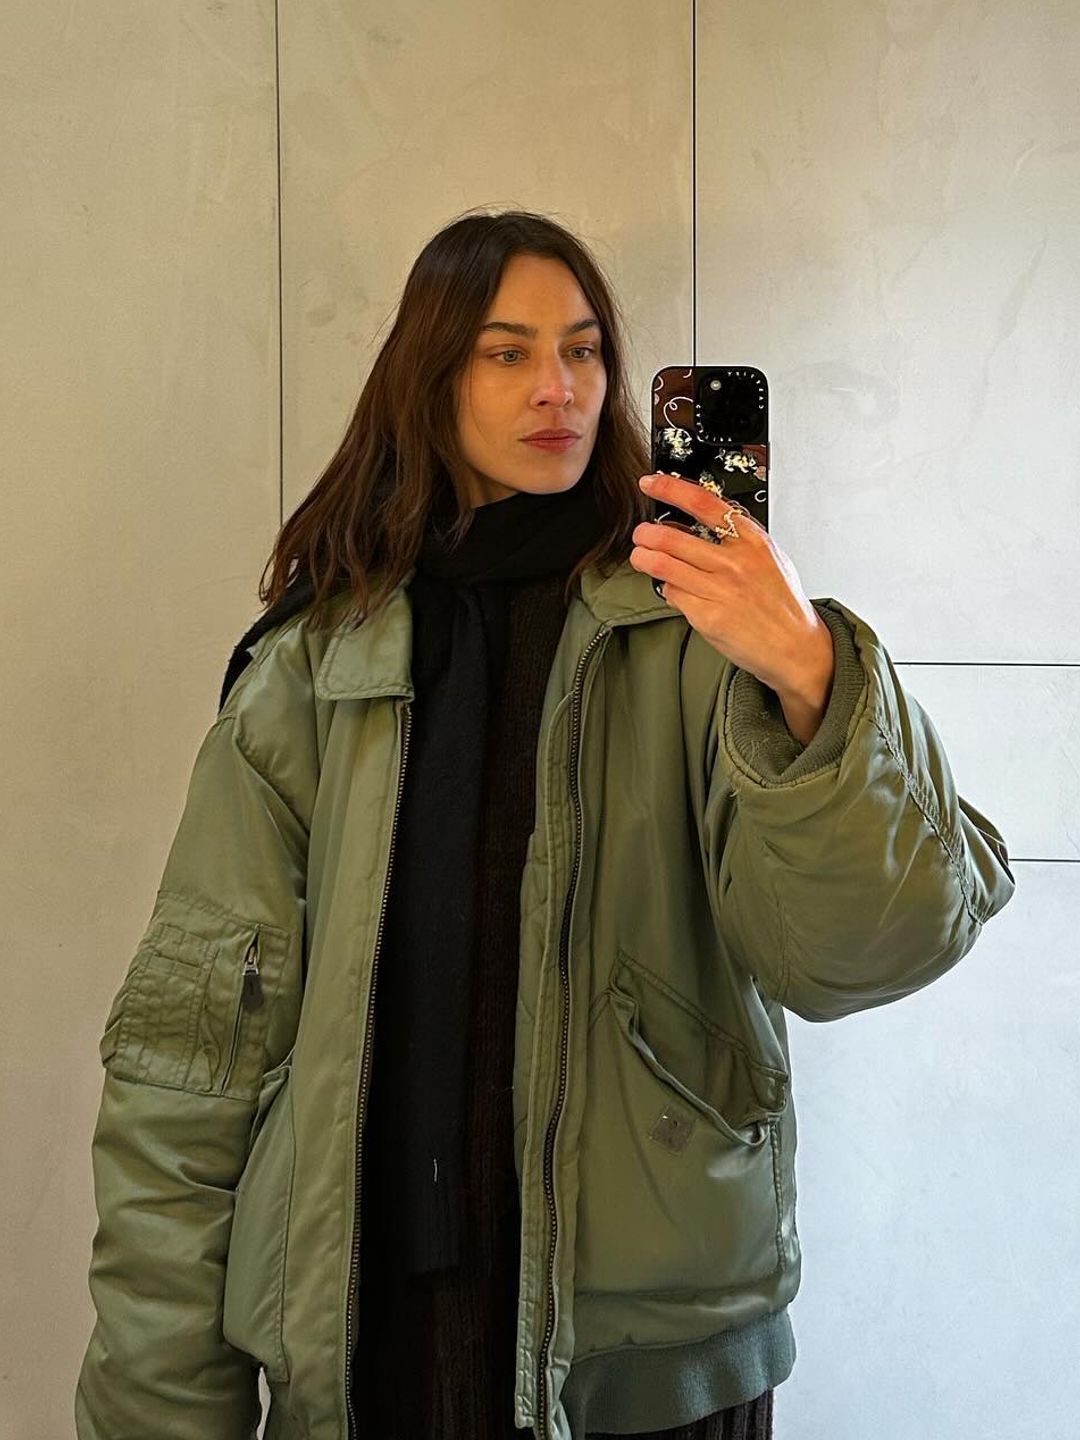 Alexa Chung poses in a green bomber jacket for a mirror selfie